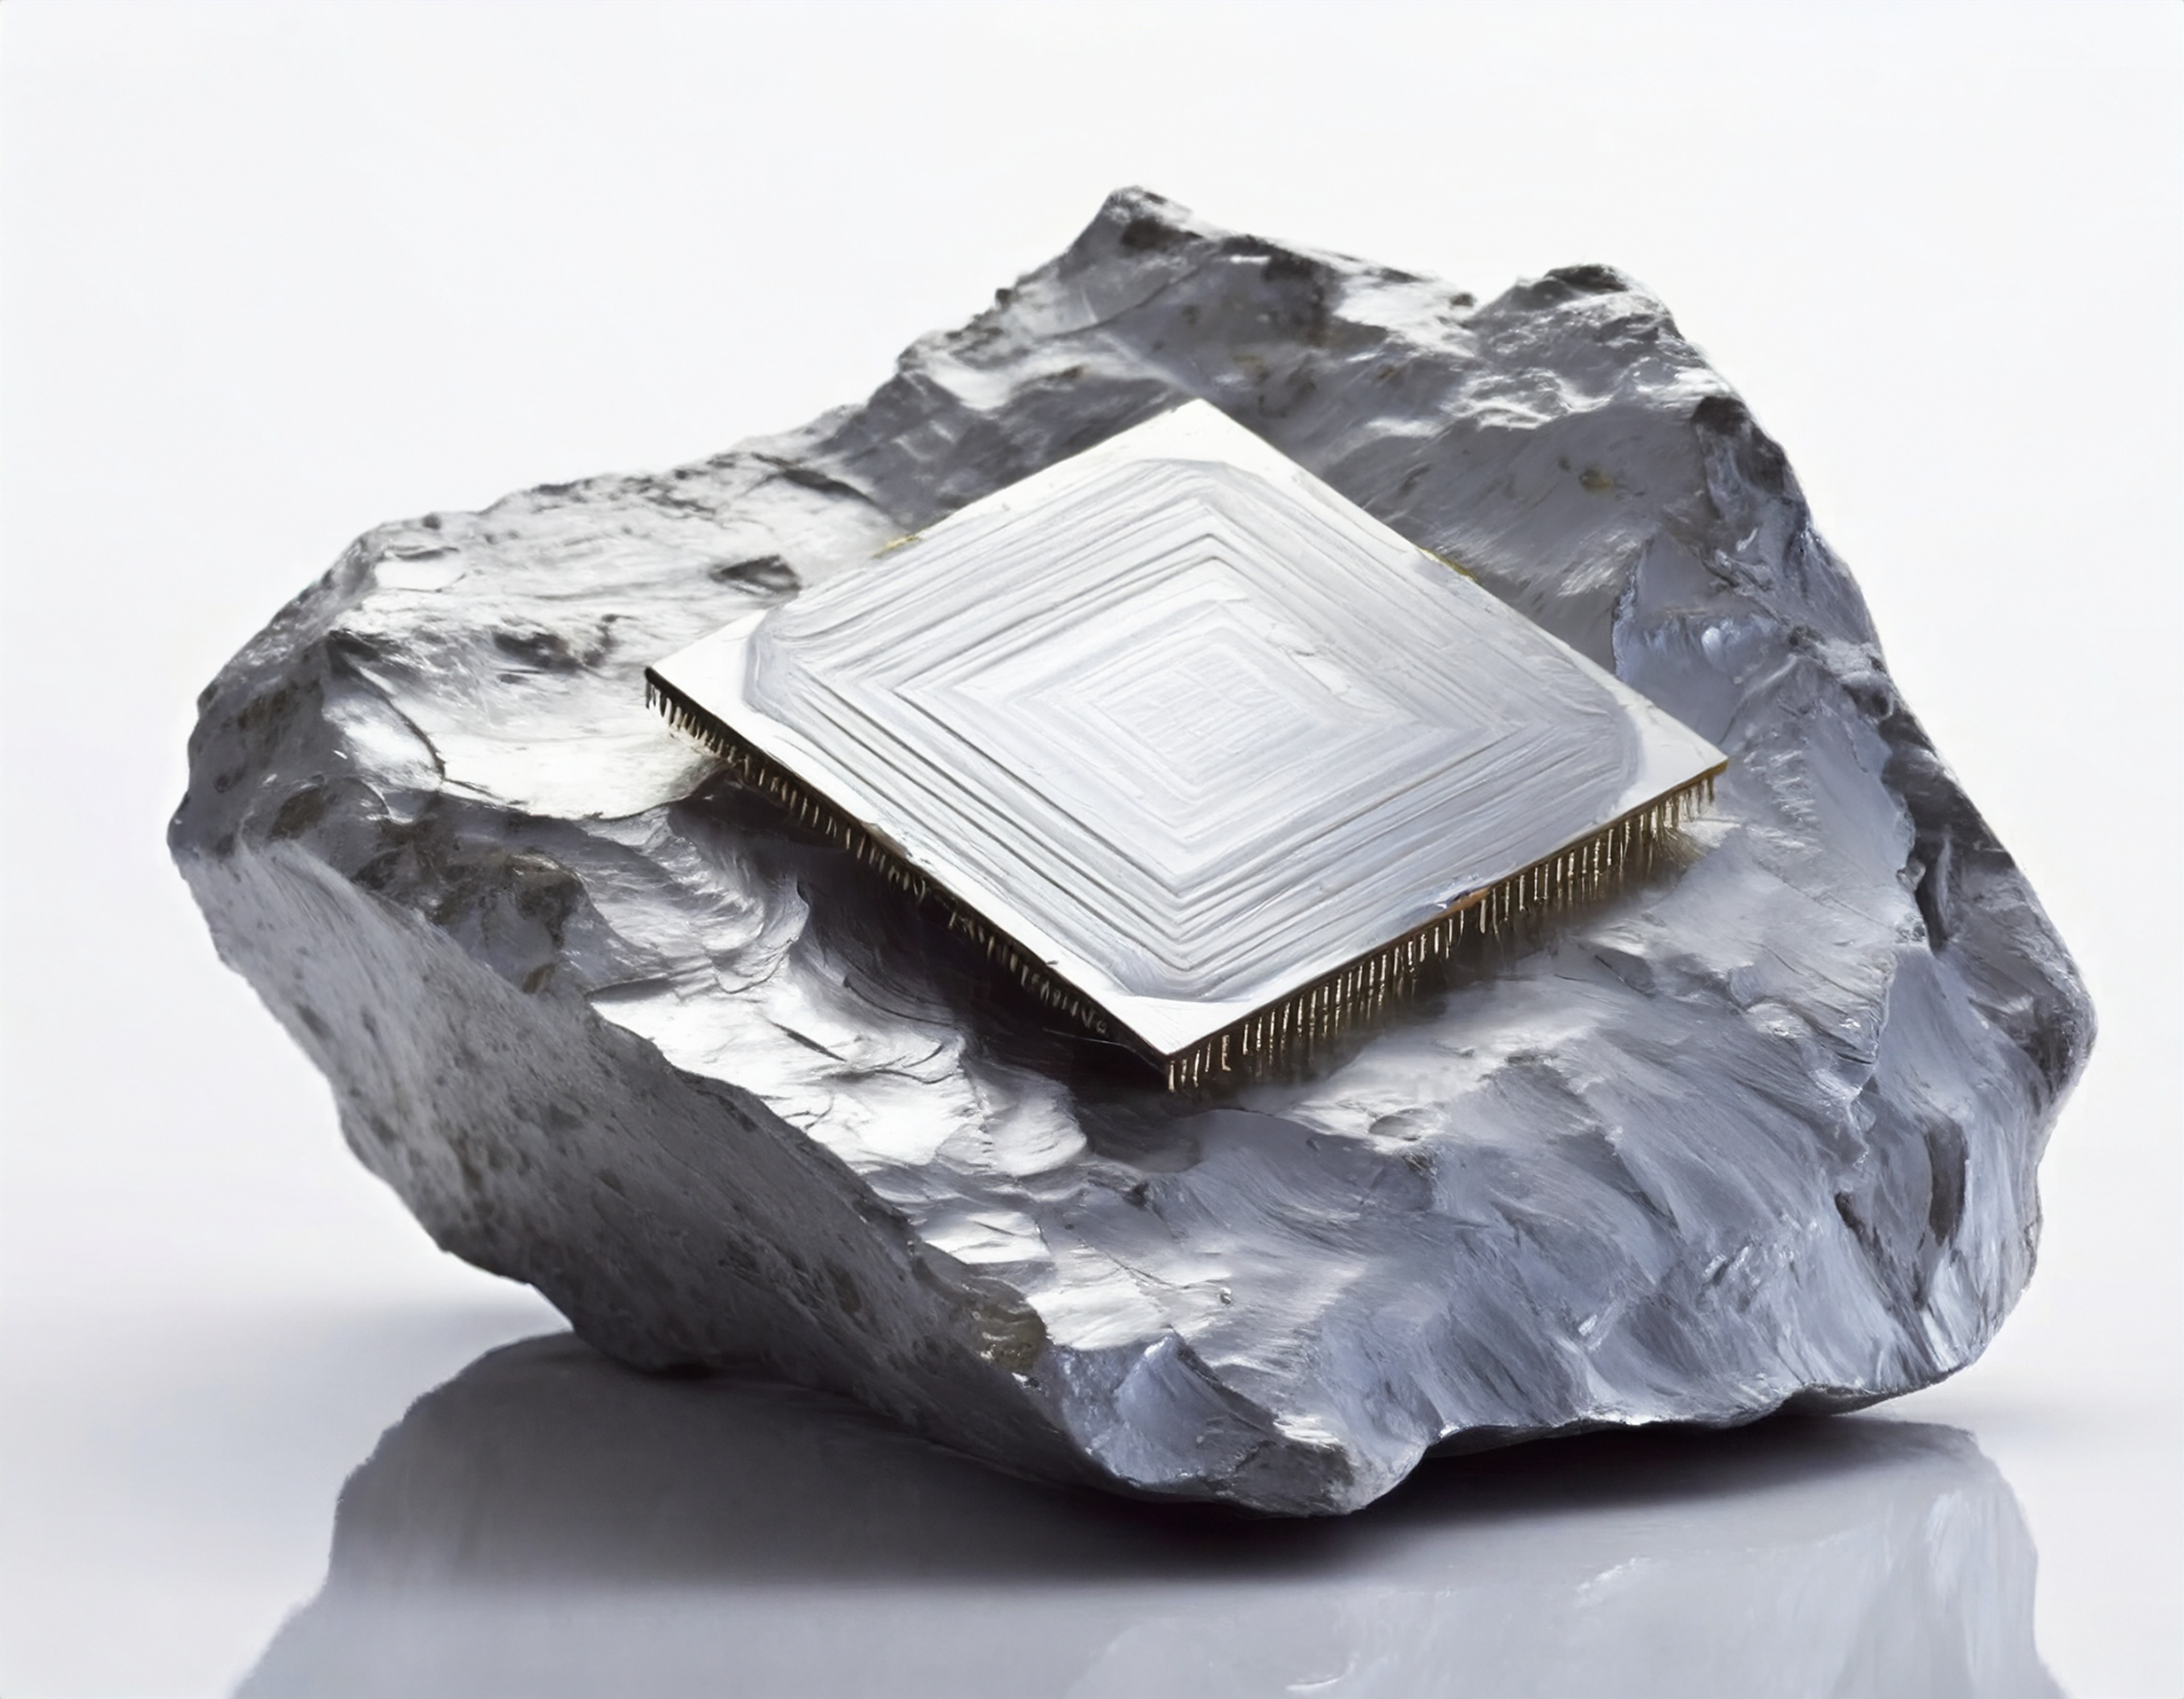 A shiny rock of silicon is on a plain white reflective surface, against a plain white background. Embedded in the rock is a rough shape of a silicon chip, which is made from the same rock of silicon